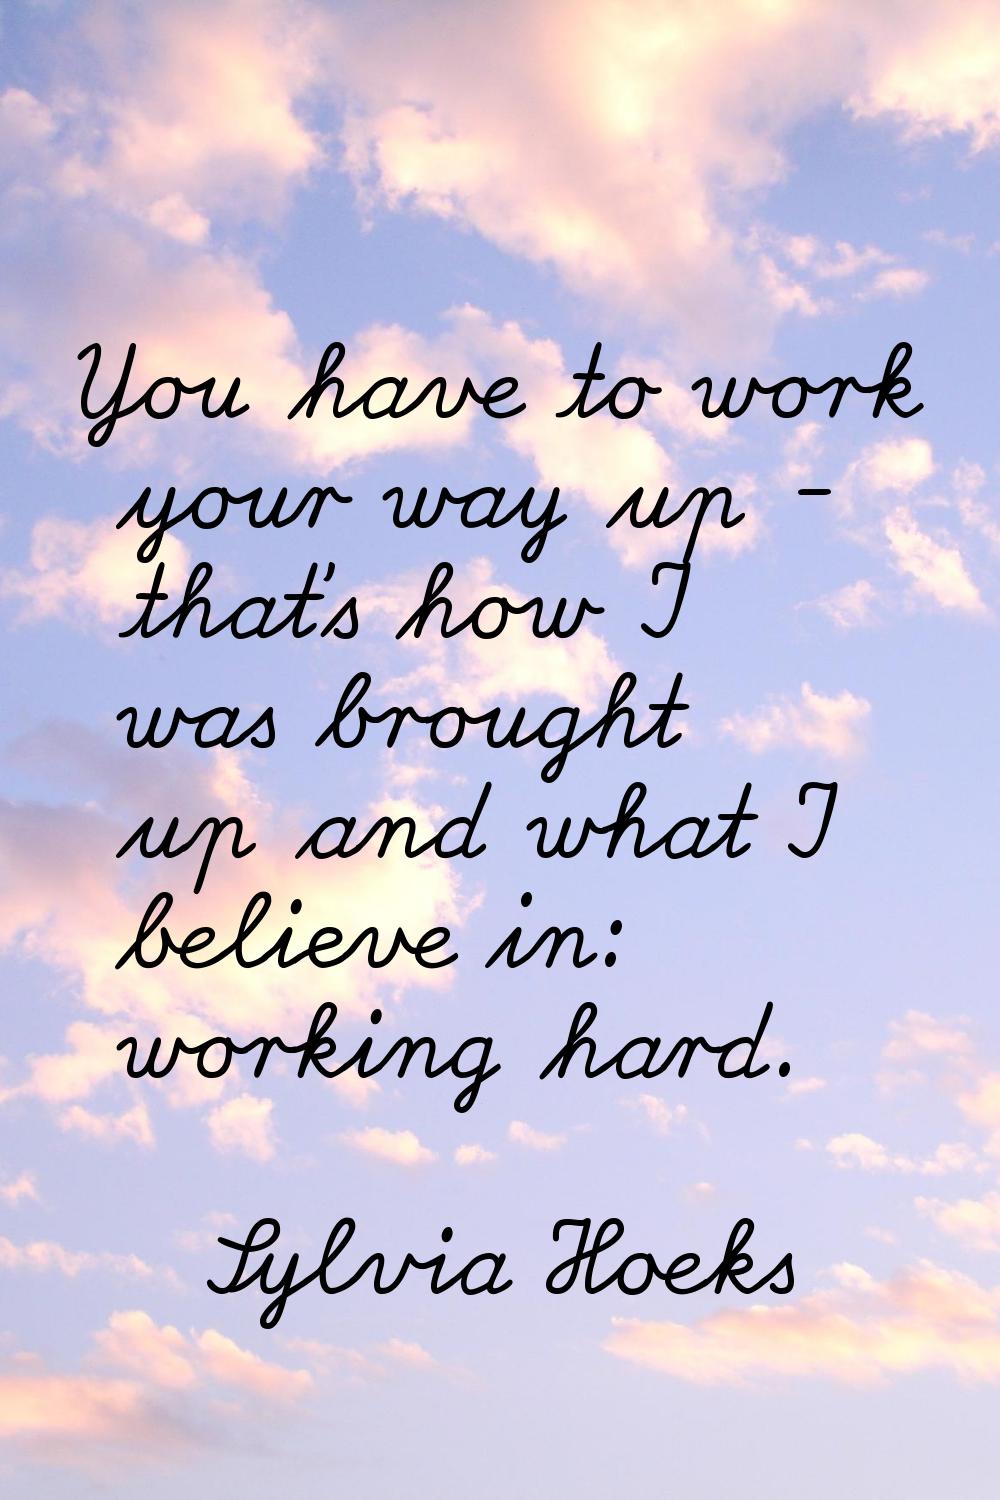 You have to work your way up - that's how I was brought up and what I believe in: working hard.